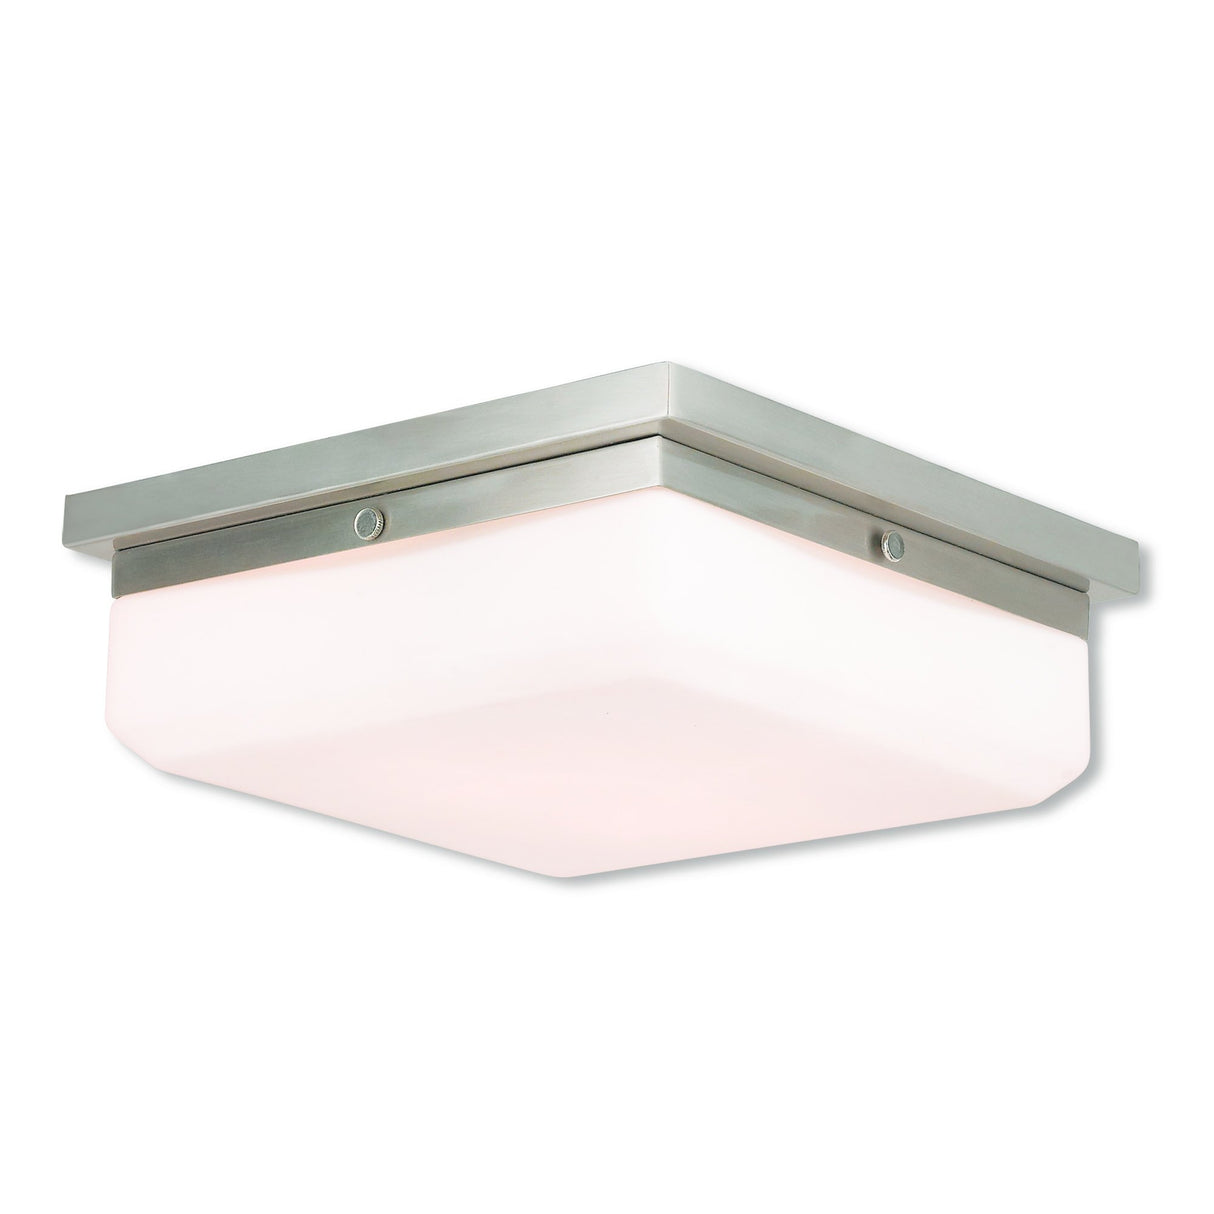 Livex Lighting 65537-91 Transitional Three Light Wall Sconce/Ceiling Mount from Allure Collection in Pwt, Nckl, B/S, Slvr. Finish, 11.00 inches, 3.88x11.00x11.00, Brushed Nickel